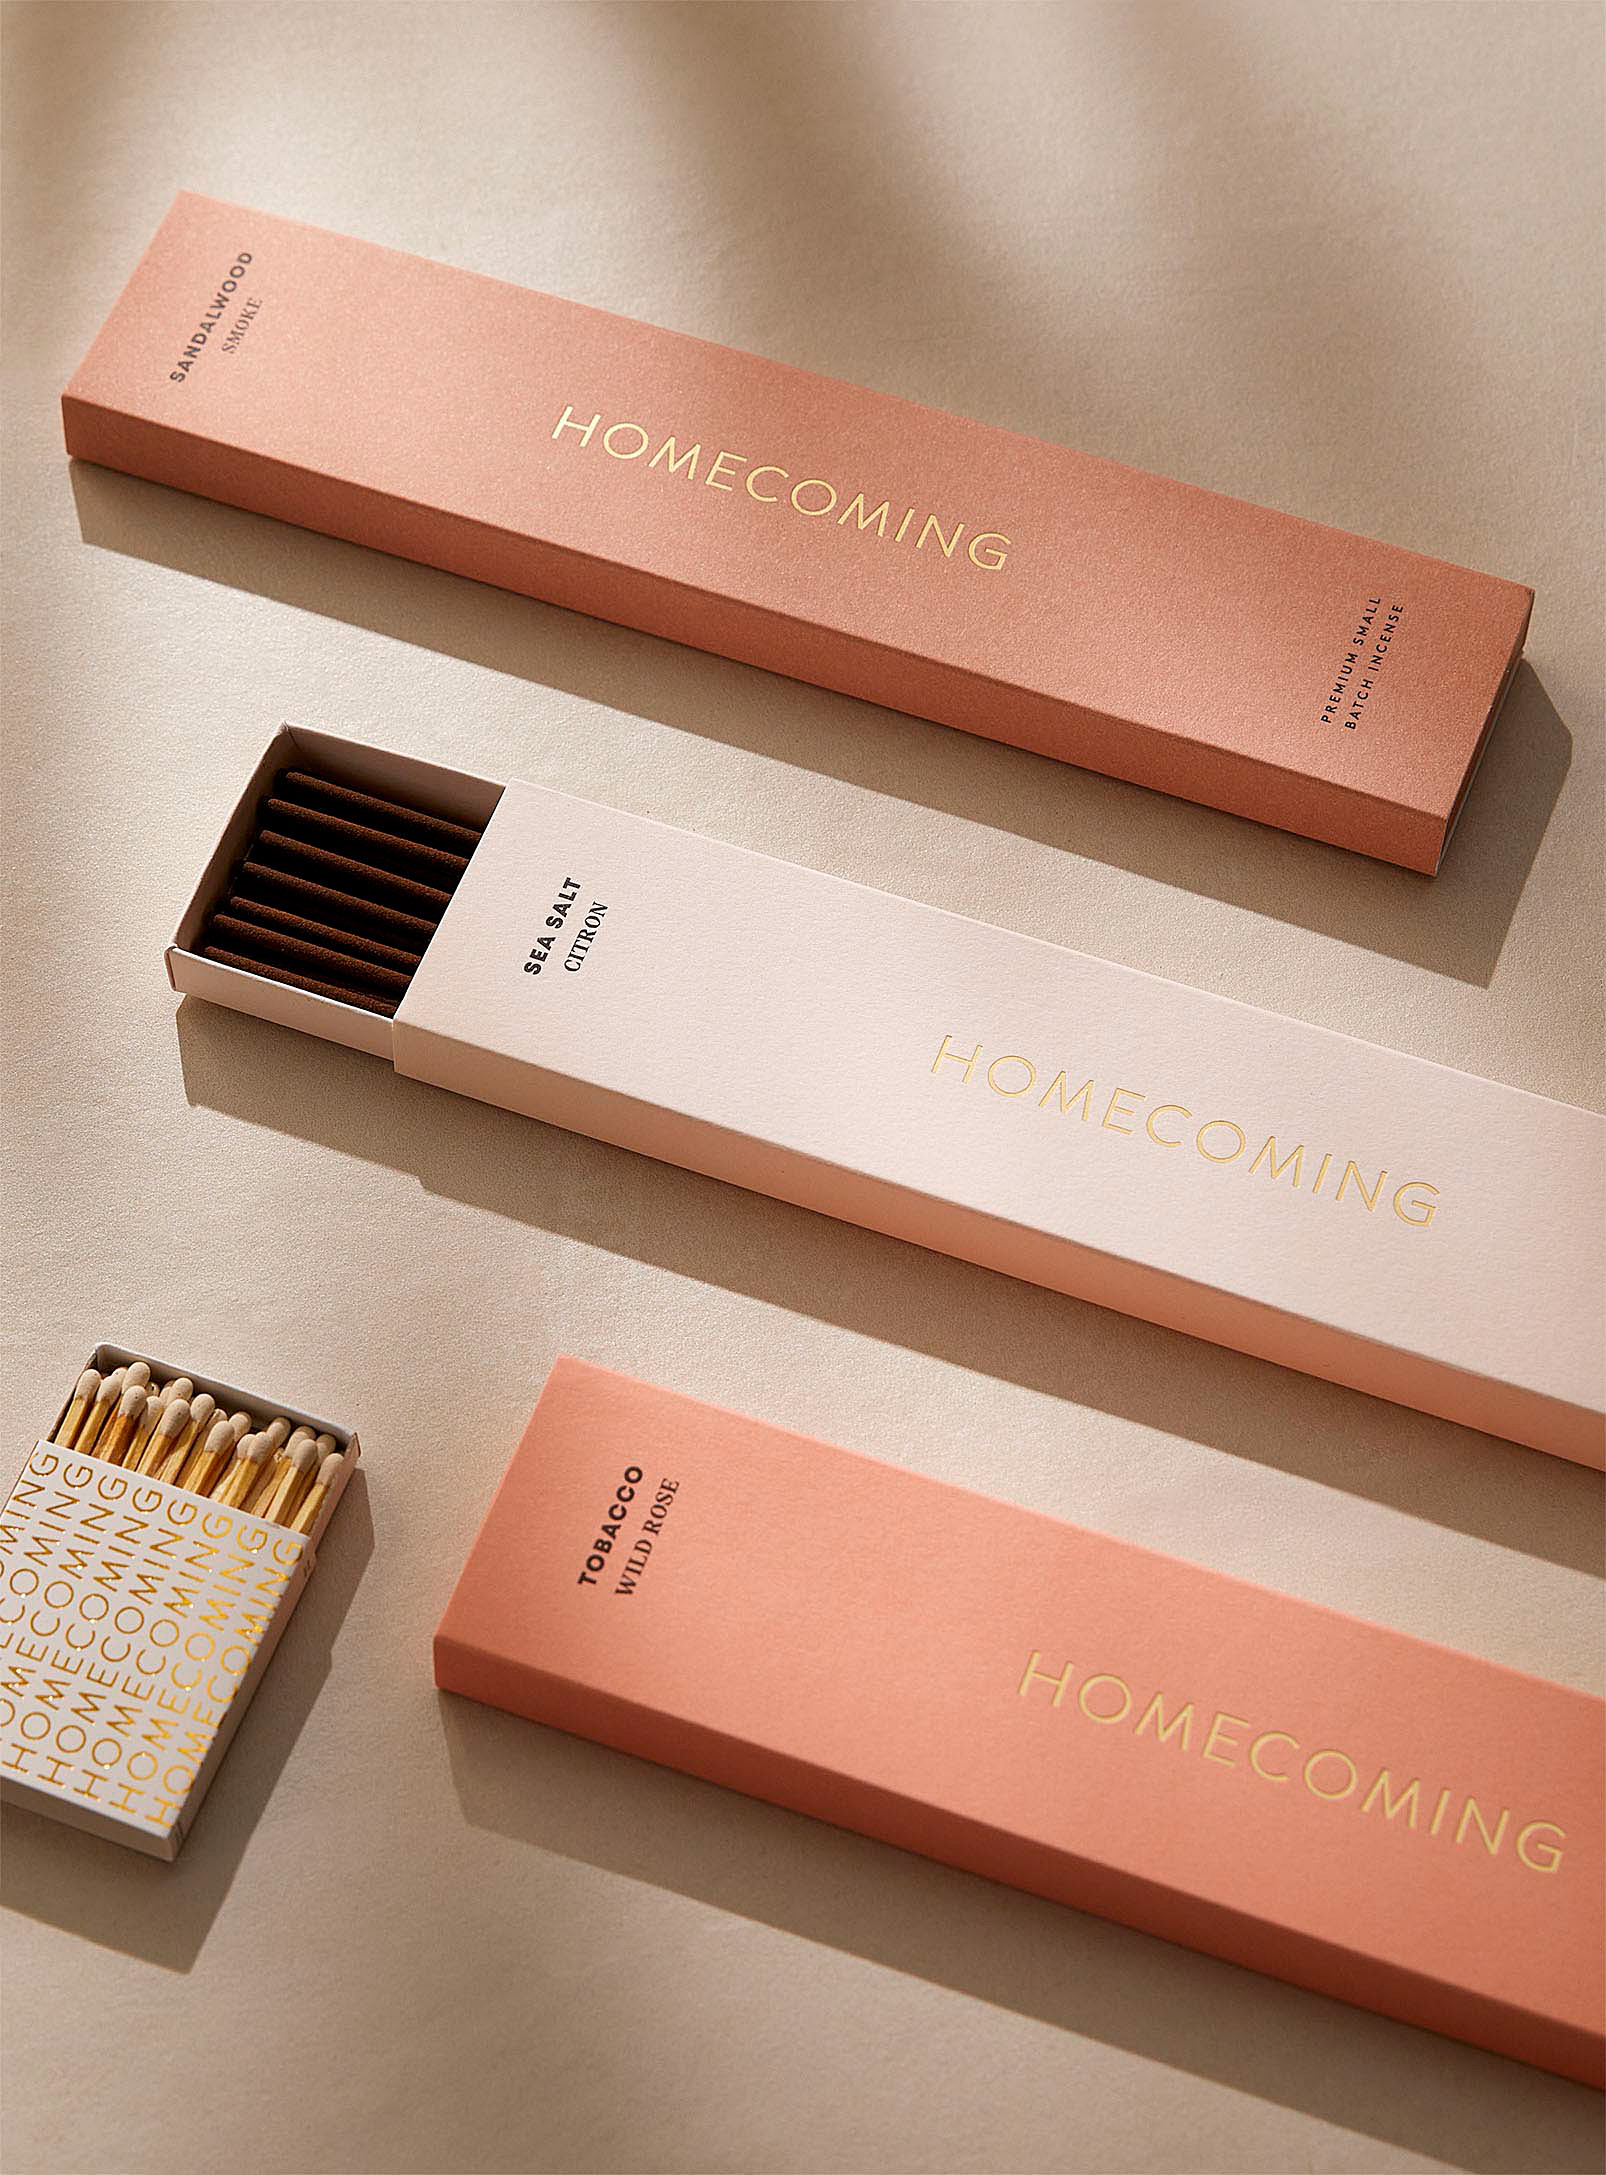 Homecoming Candles - Le trio d'encens